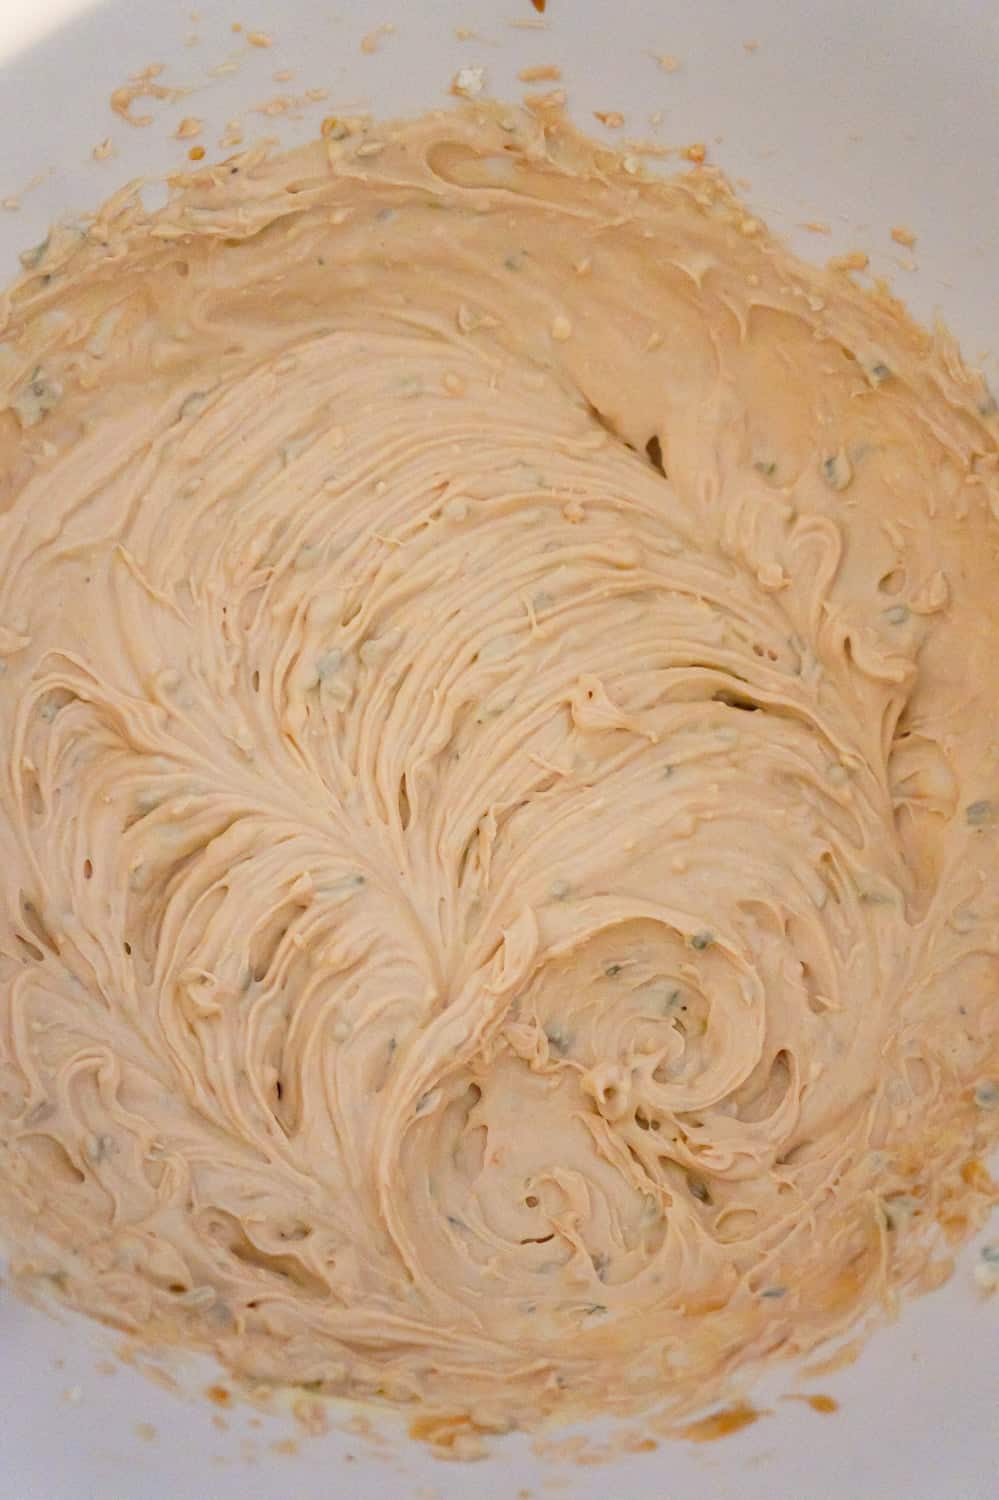 cream cheese and bbq sauce mixture in a mixing bowl